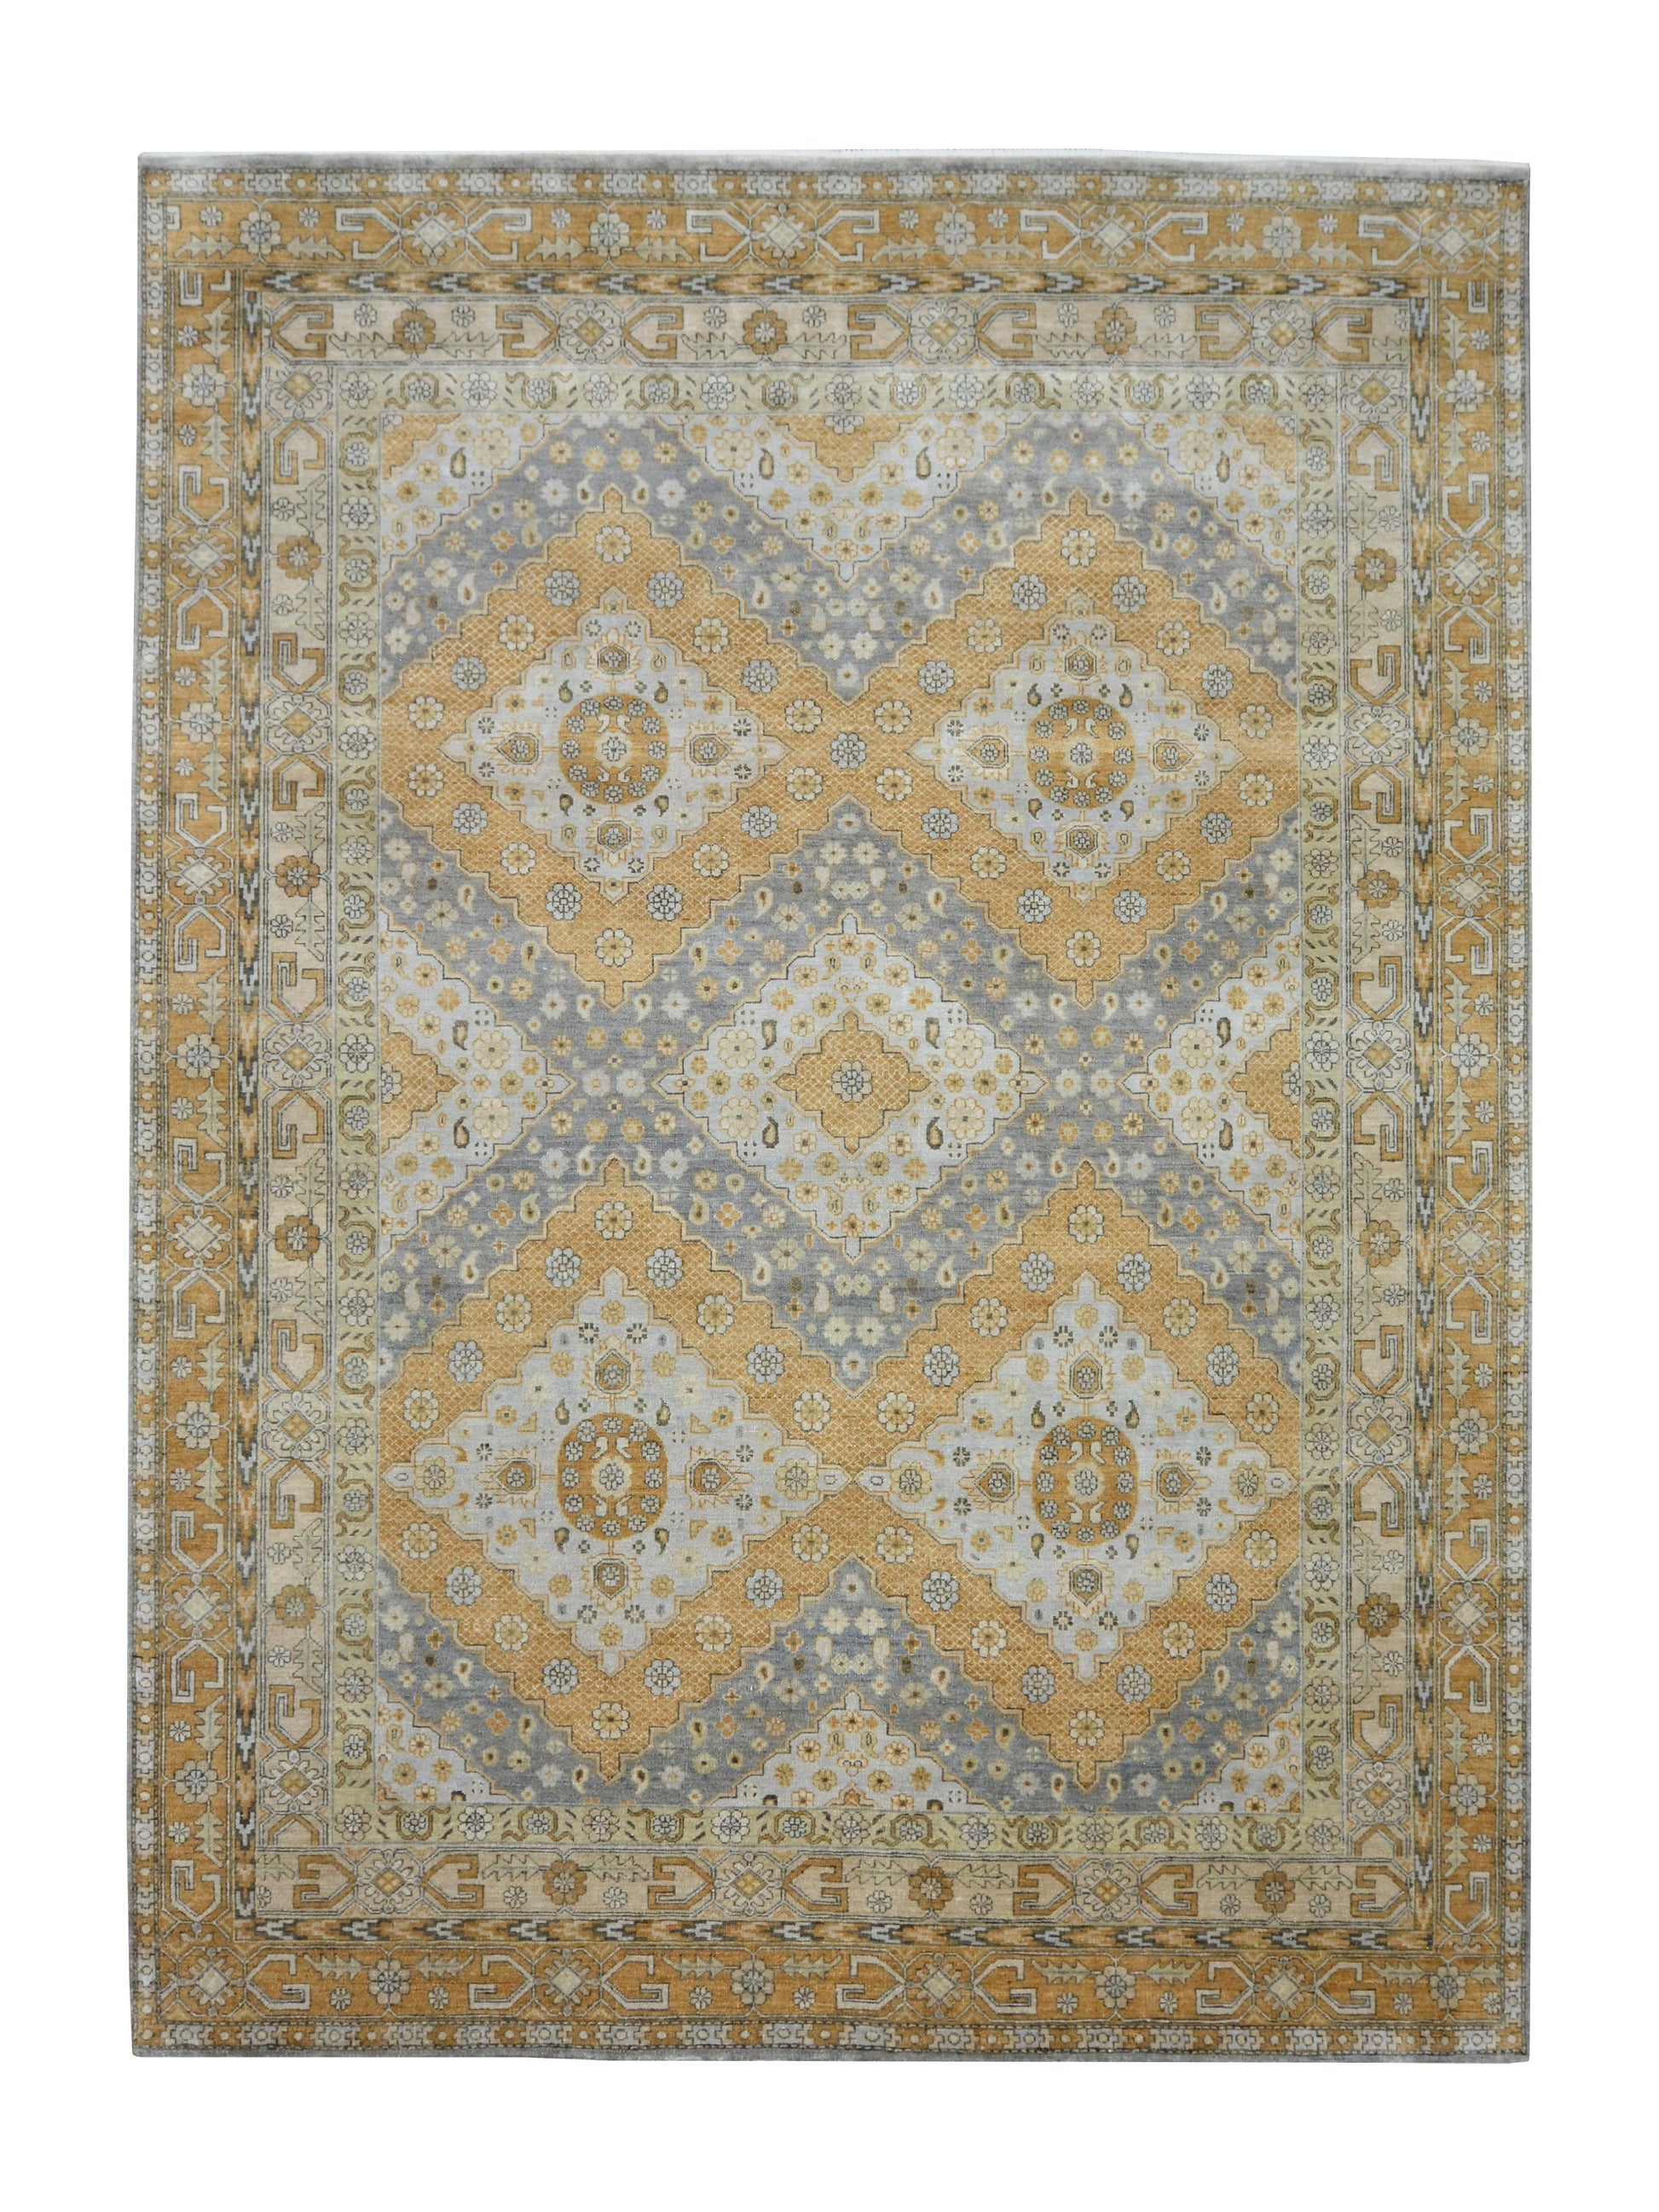 Get trendy with Gold and Grey Pure Silk Traditional Handknotted Area Rug 9.0x12.3ft 274x373Cms - Traditional Rugs available at Jaipur Oriental Rugs. Grab yours for $7940.00 today!